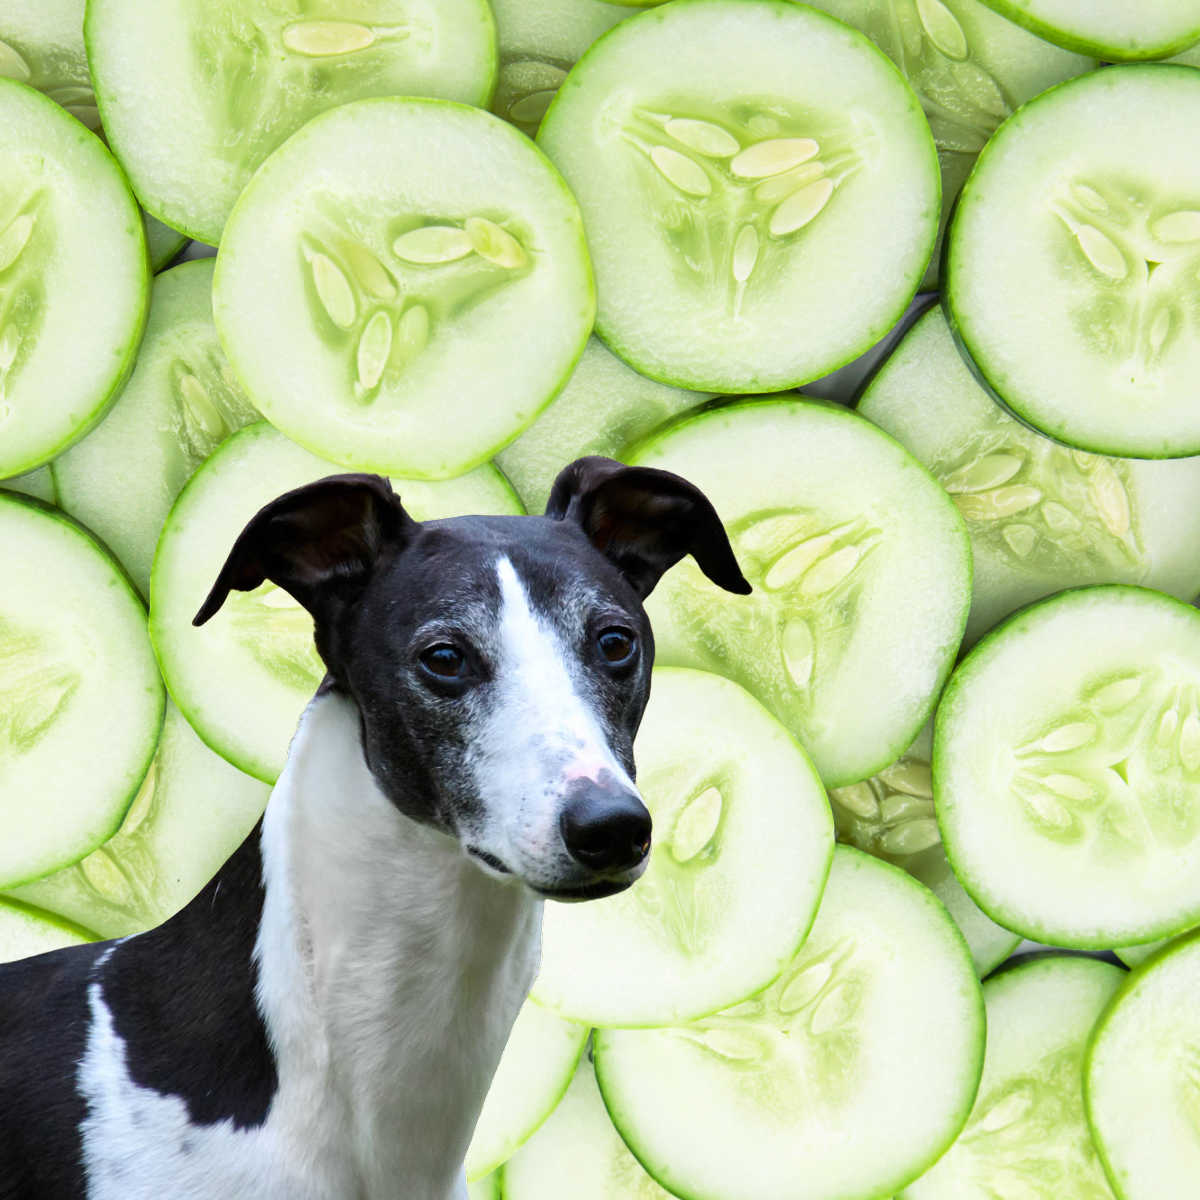 black and white dog with cucumber slices in the background.